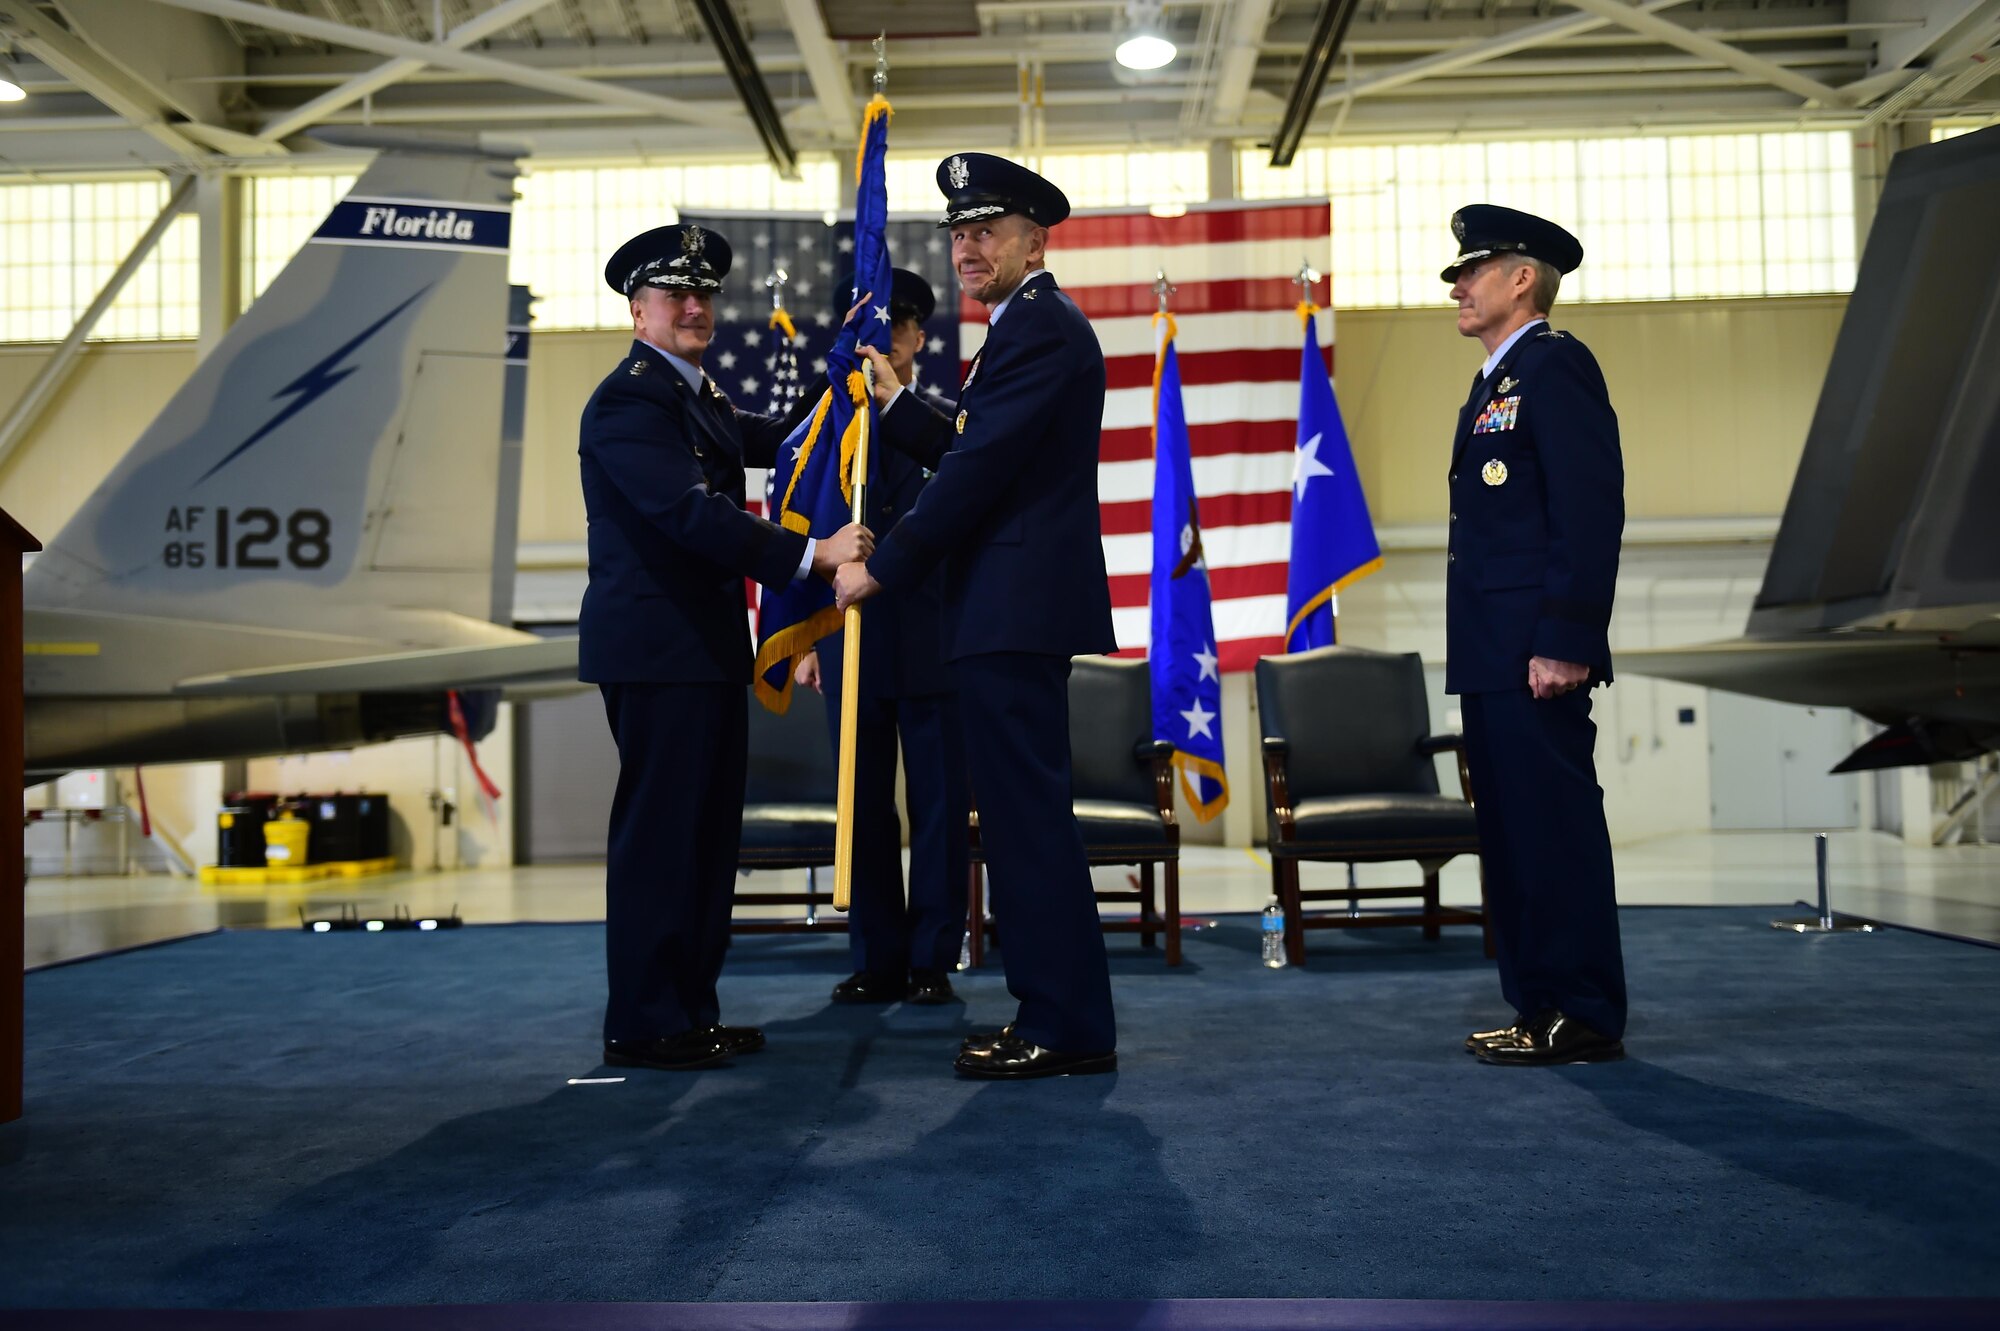 U.S. Air Force Chief of Staff Gen. David L. Goldfein passes the Air Combat Command guidon to Gen. James M. Holmes during ACC’s Change of Command ceremony at Joint Base Langley-Eustis, Va., March 10, 2017. Holmes assumed command from Gen. Herbert “Hawk” Carlisle, who retired after 39 years of service to the Air Force. (U.S. Air Force photo/Senior Airman Kimberly Nagle)